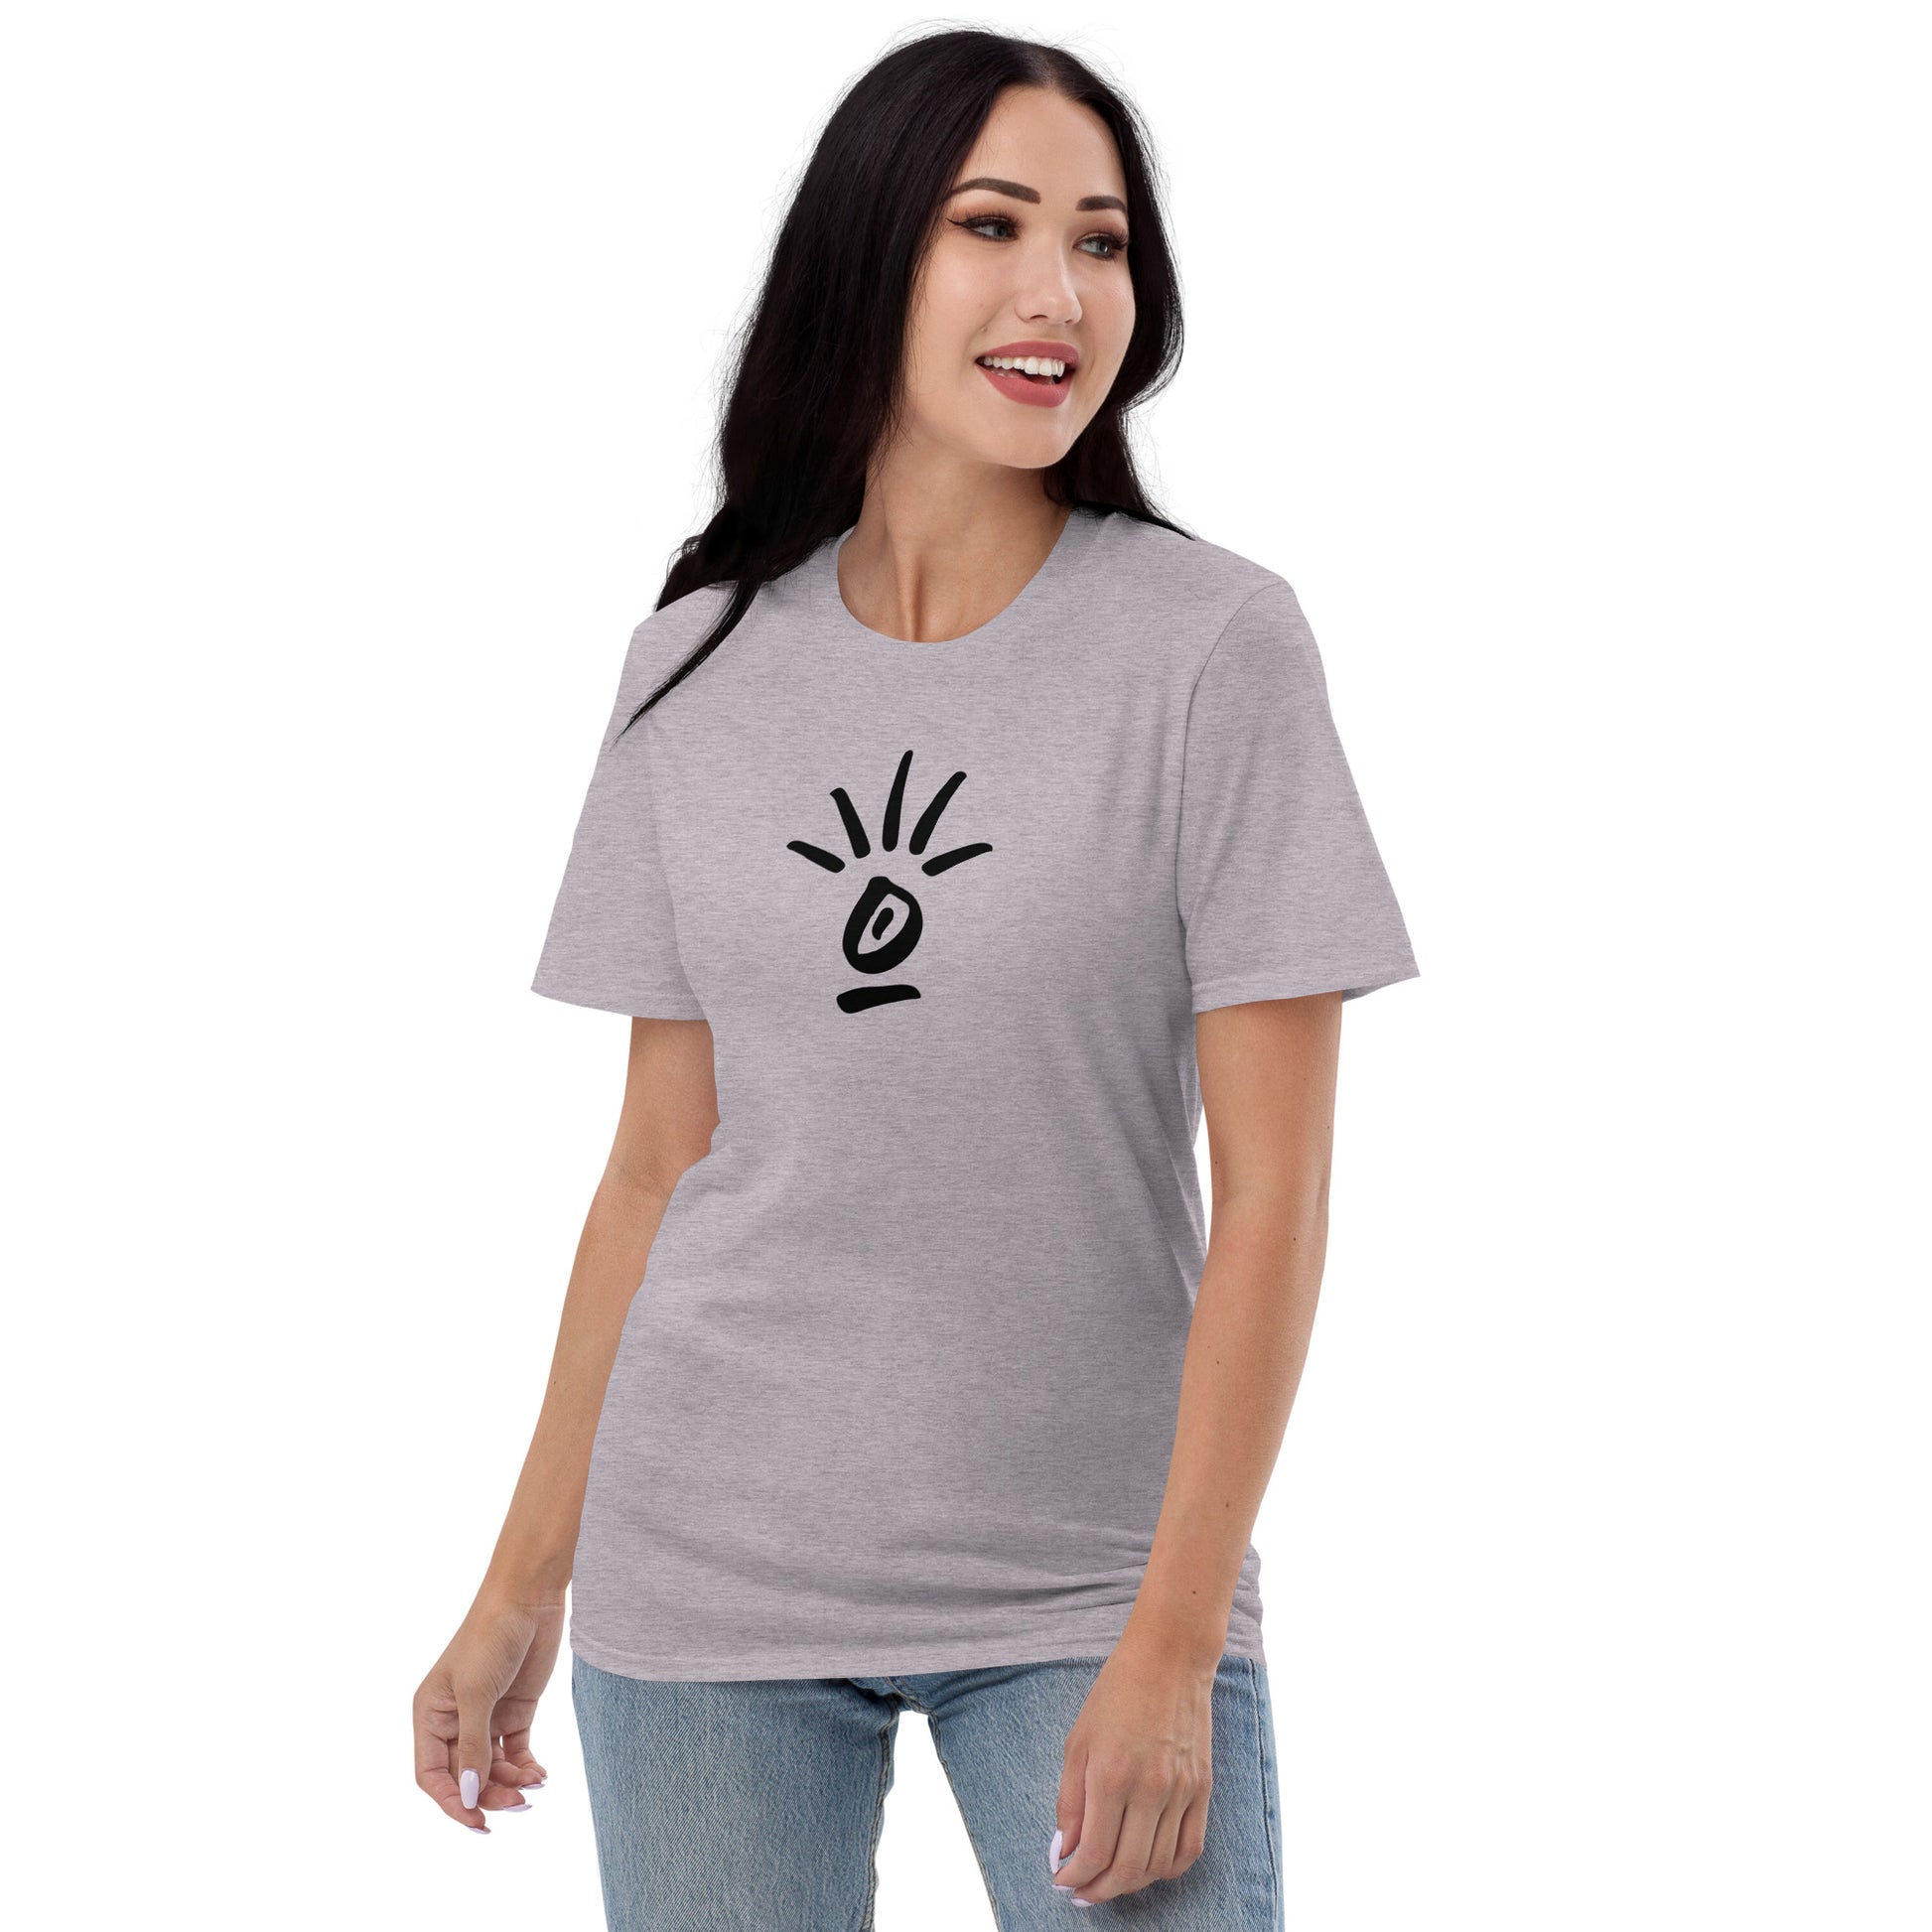 Tribe Eye - Tribe of Weirdos' unisex t-shirt, flaunting a bold design that celebrates diversity and the strength found in being uniquely you.